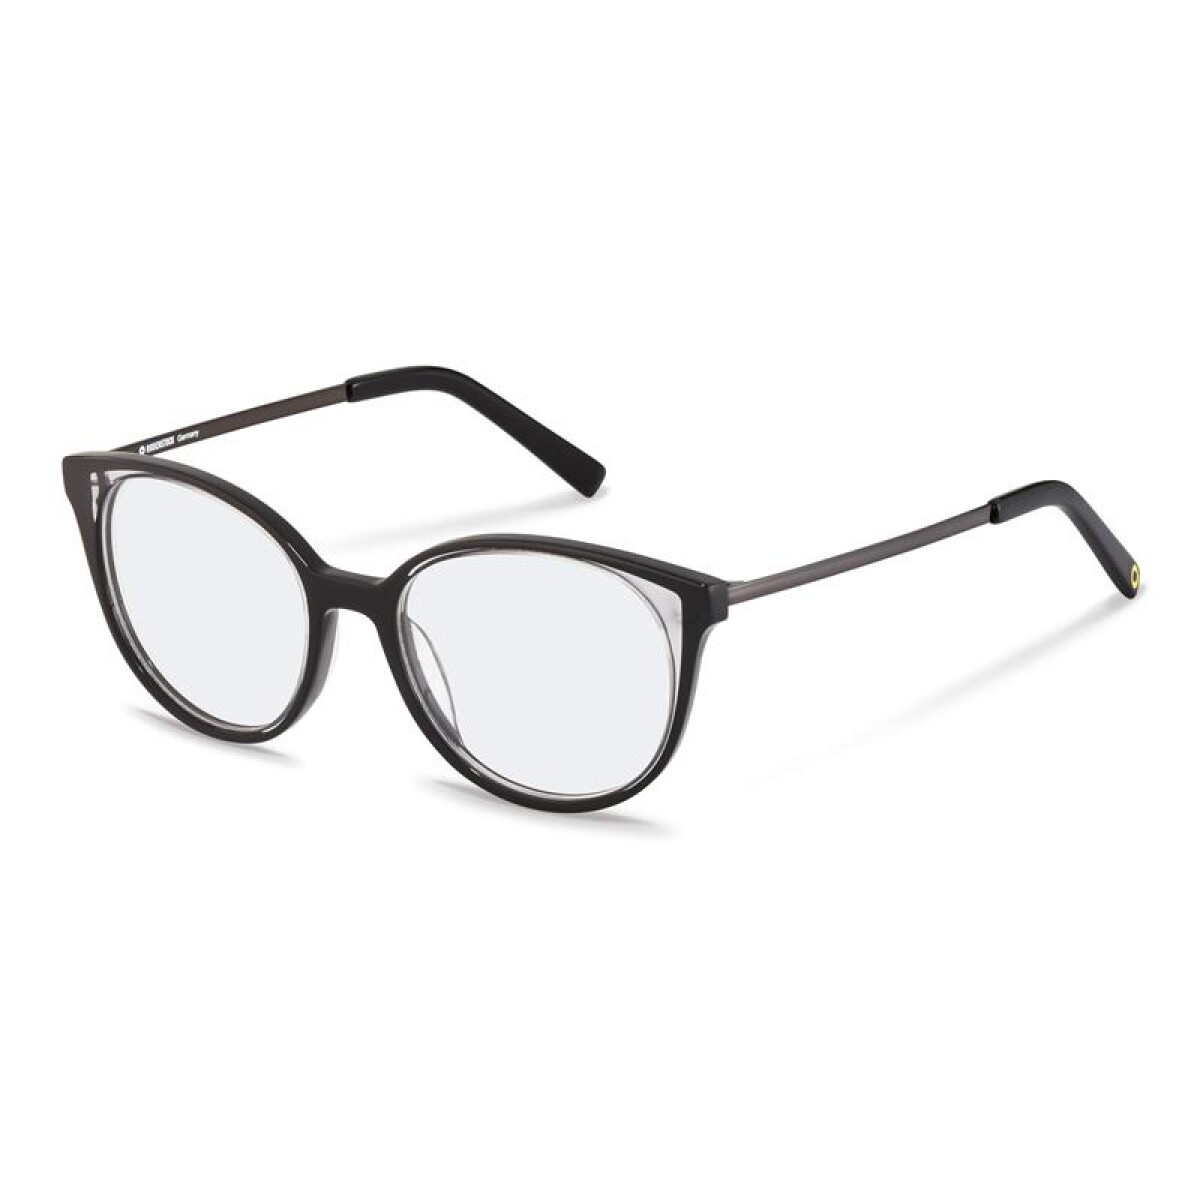 Rodenstock Rr462 - A 